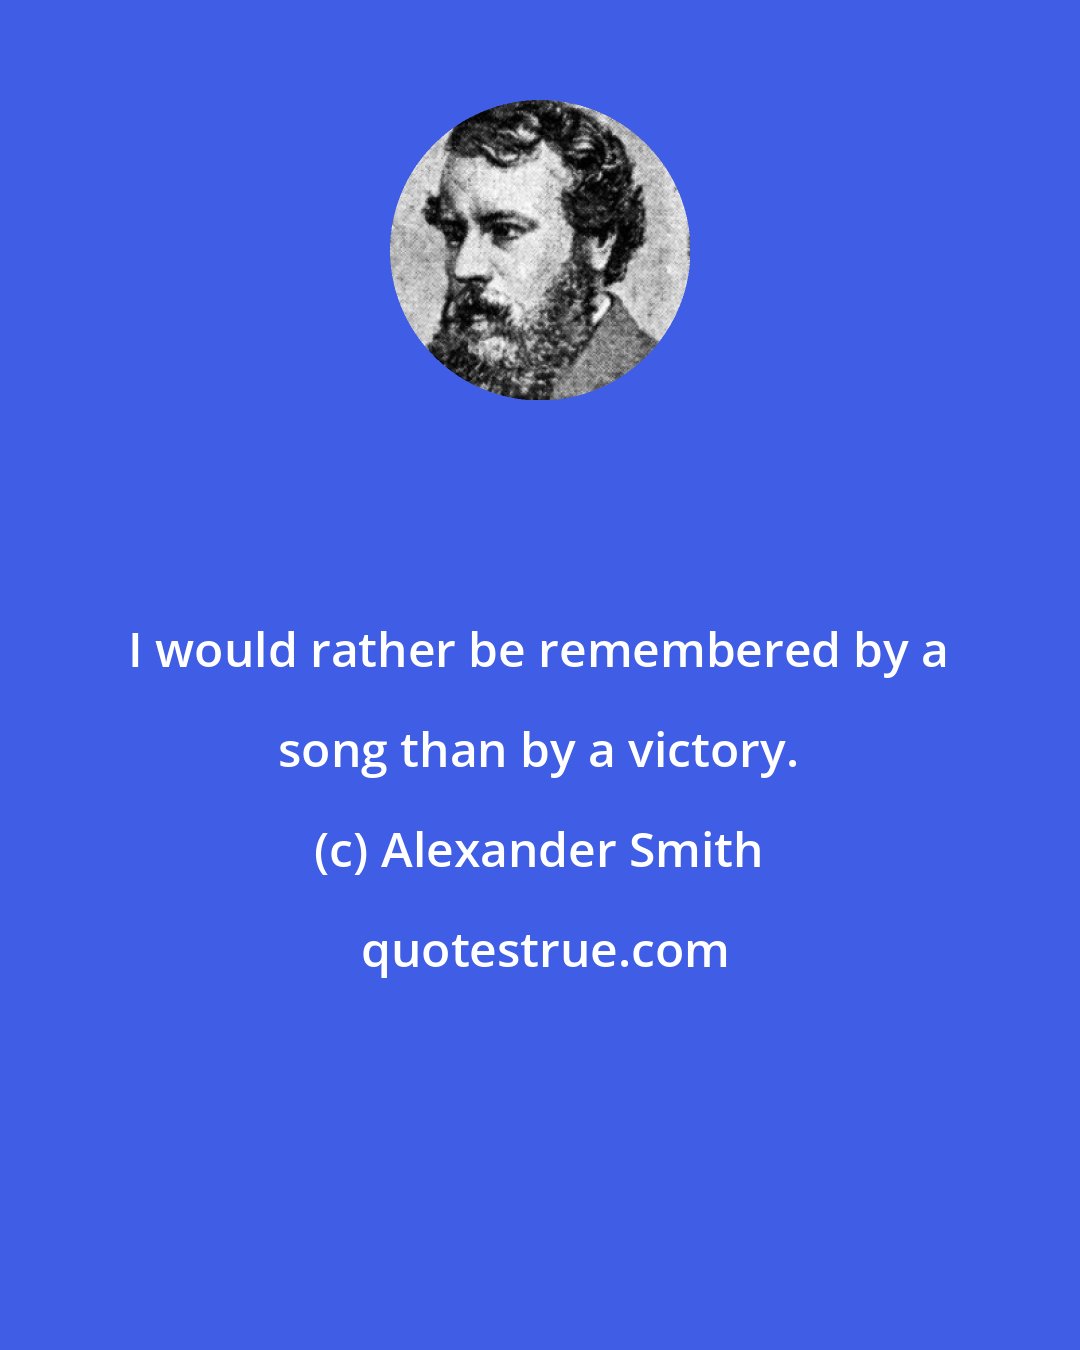 Alexander Smith: I would rather be remembered by a song than by a victory.